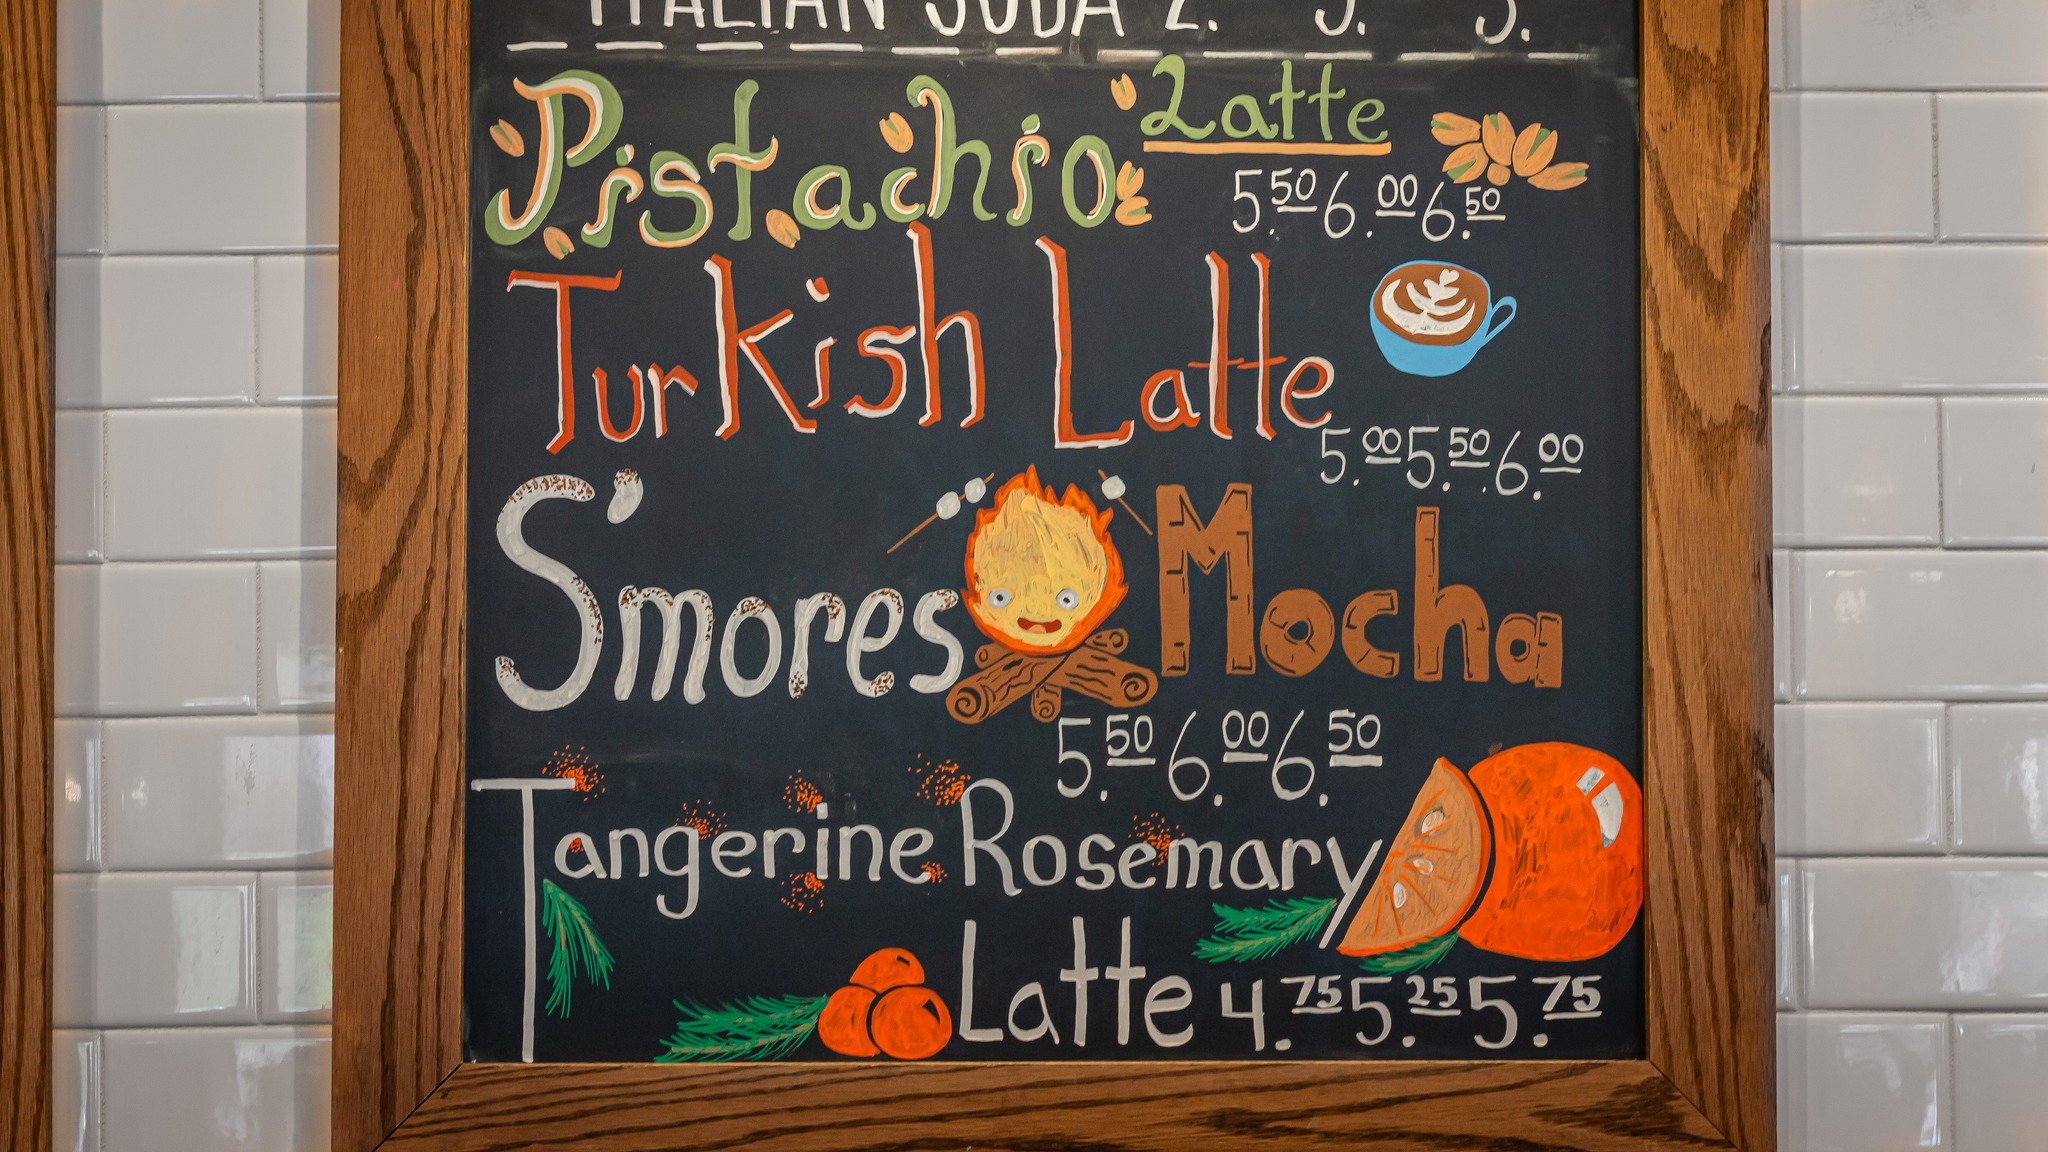 It's been about a week and a half of our new featured menu! 🍊🍫🔥

We are stoked to have all of our brand new pistachio options. Which one are you liking the most? And of course, the S'mores Mocha is back!

Let us know which one of these drinks is c